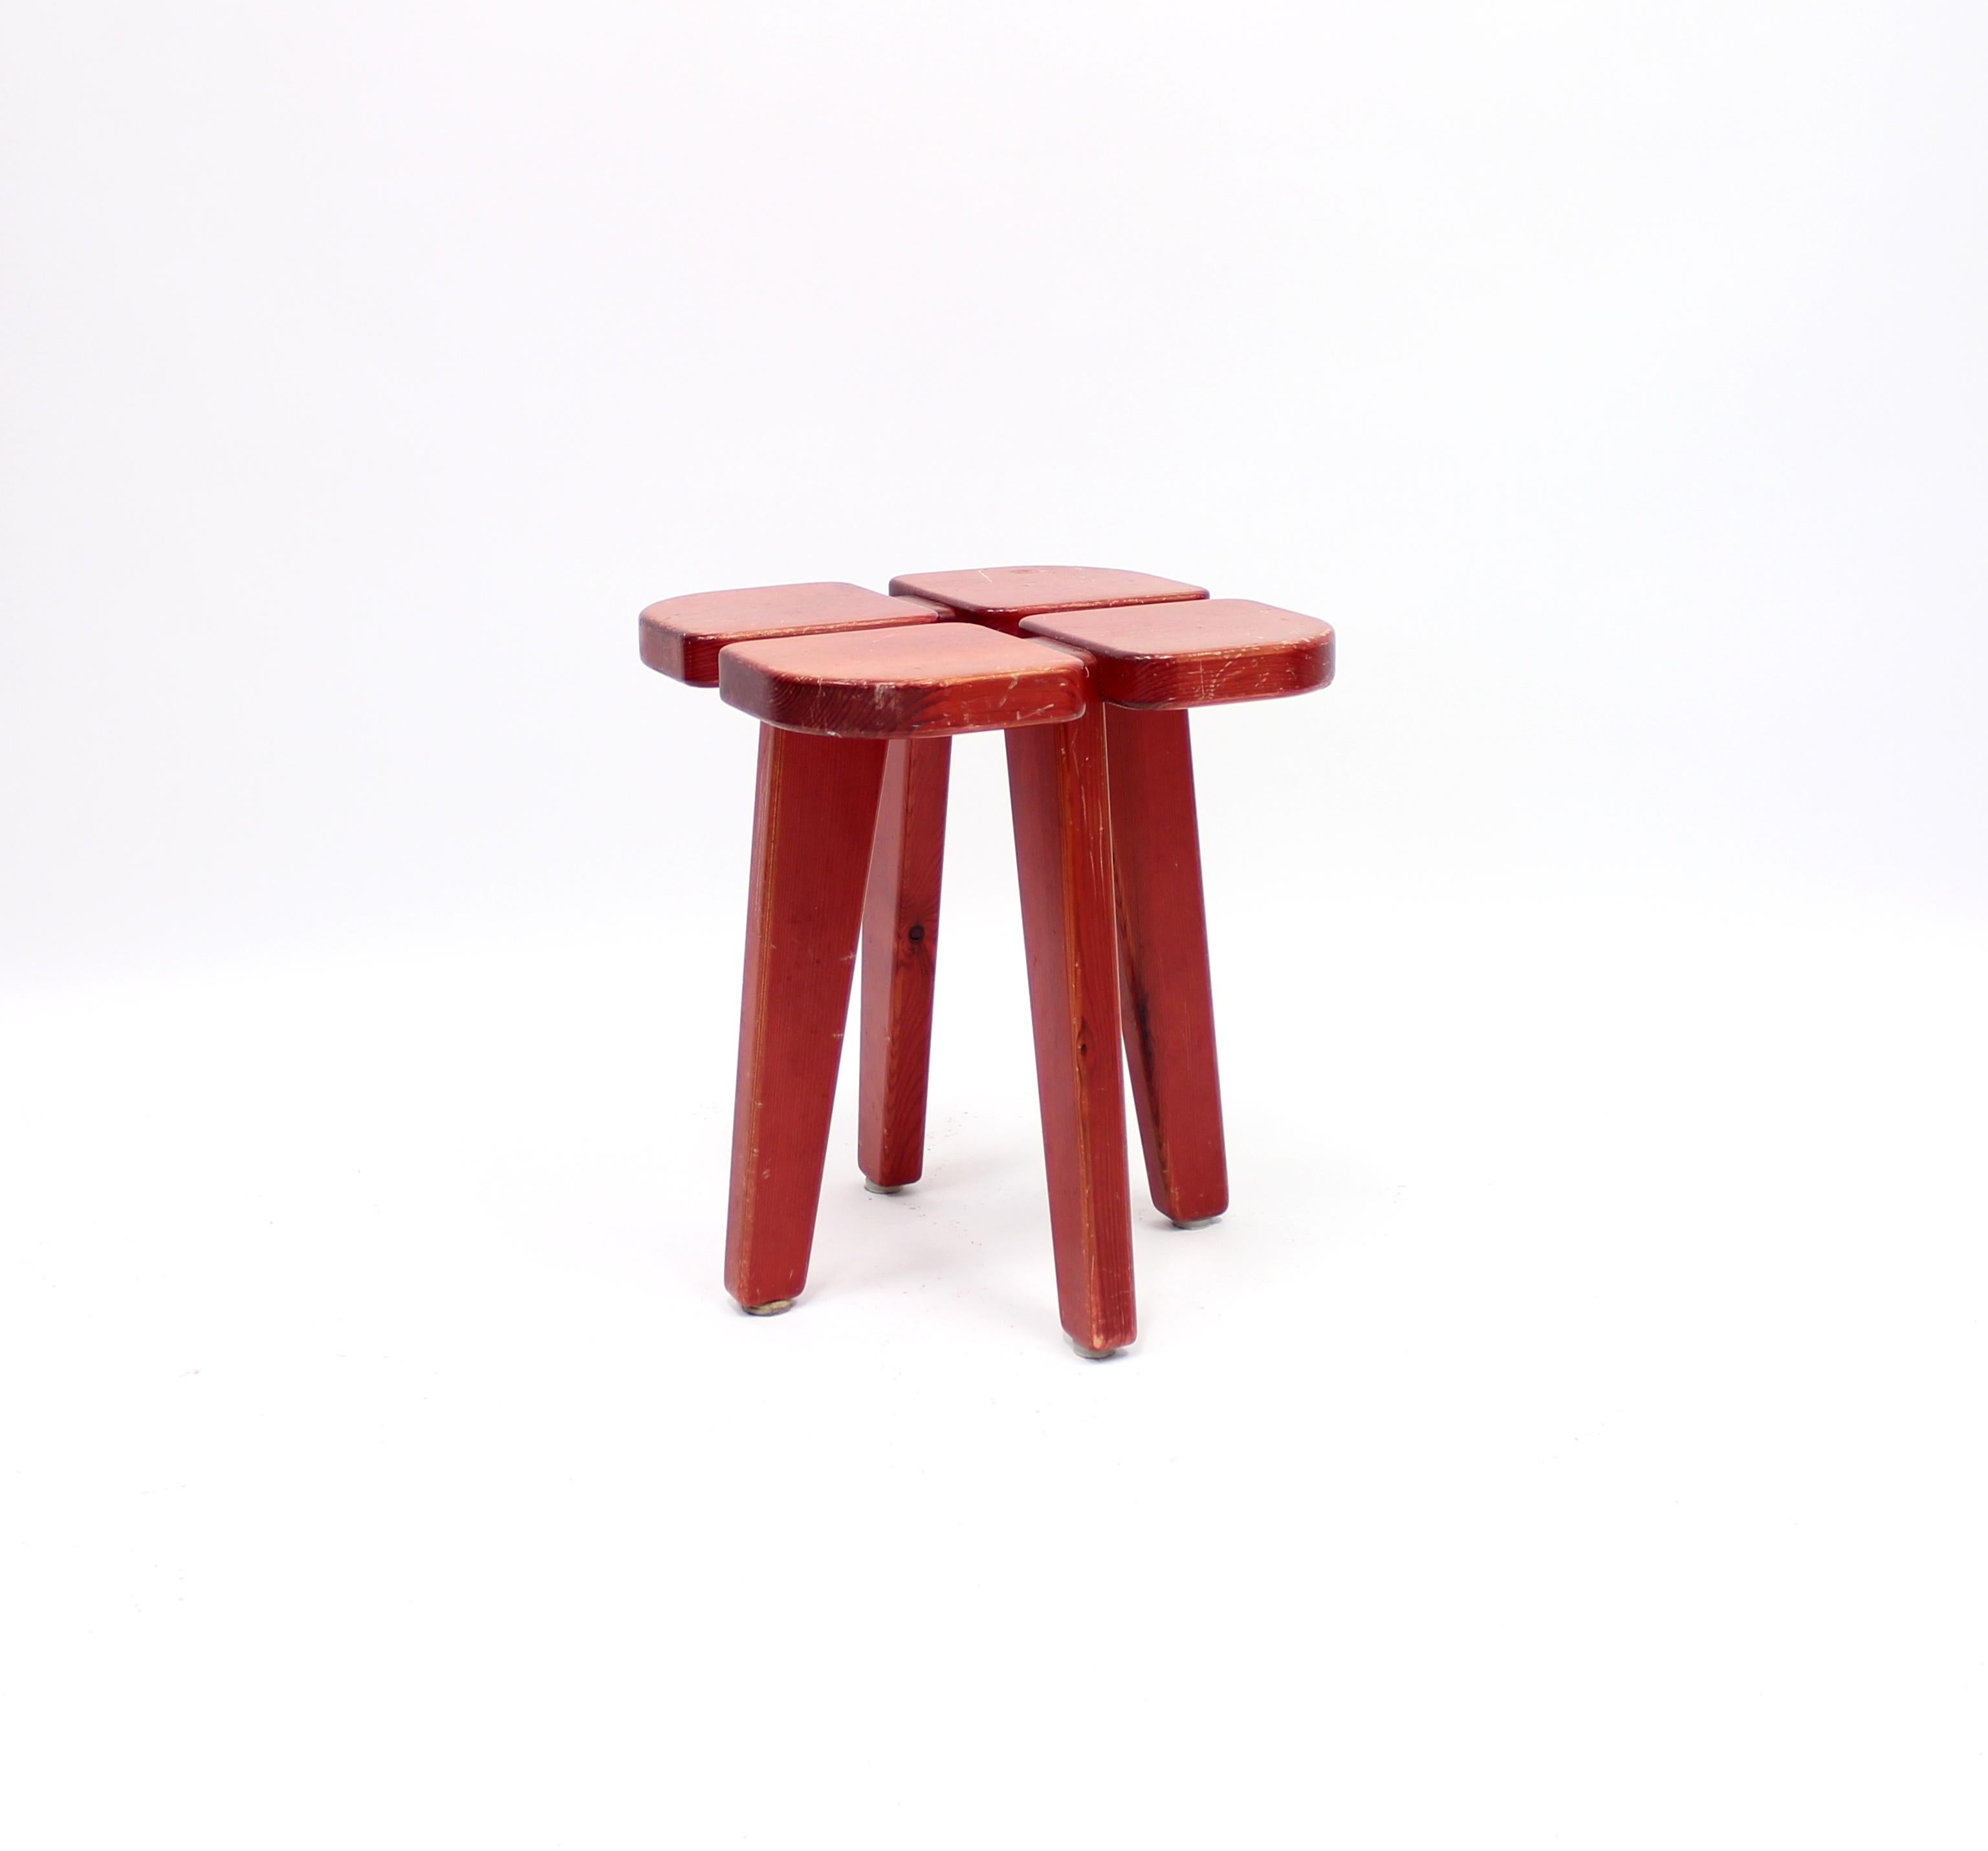 Stool designed by Finish designer Lisa Johansson-Pape for Stockmann Orno in the 1950s. Pape is world famous for her lightning design for Orno so this is among the few furniture she ever designed. Untouched original condition with a few scratches and